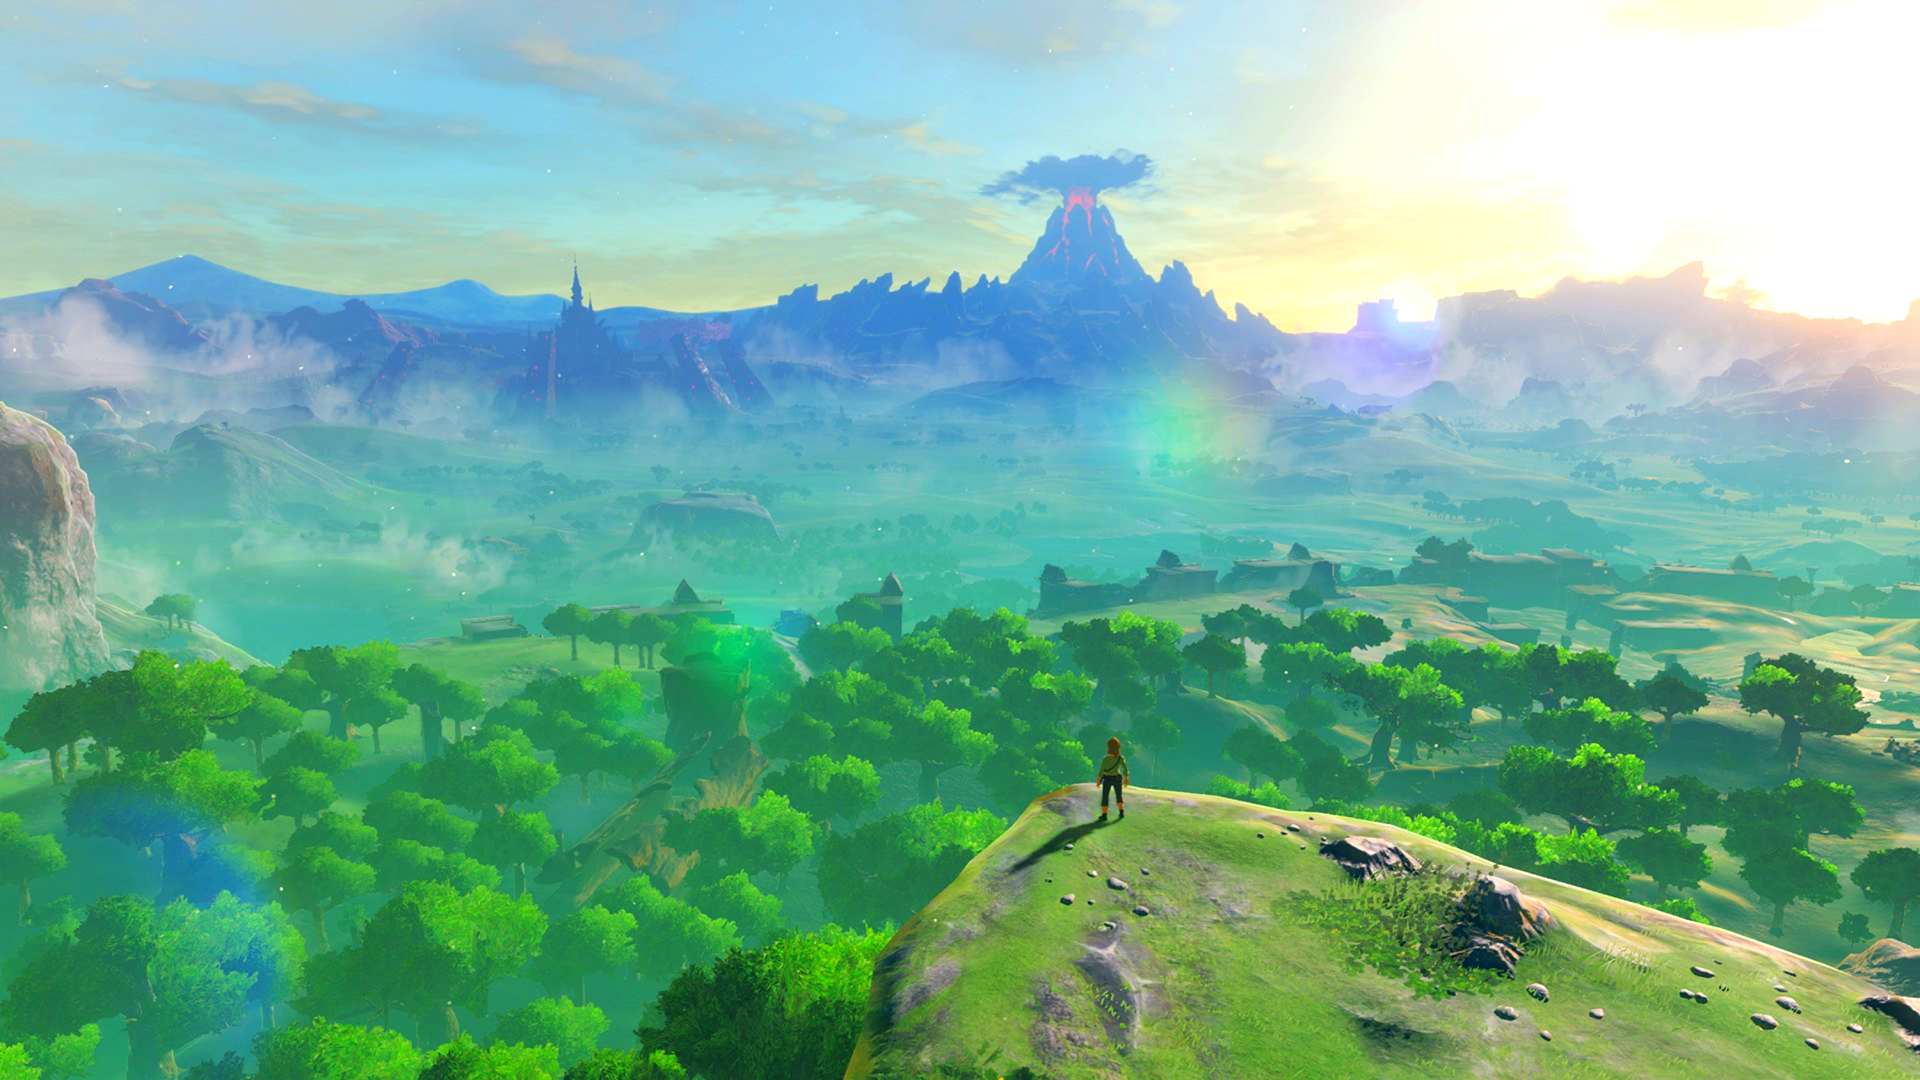 Breath of The Wild redefined open-world games and inspired developers to seek out the genre's true nature.